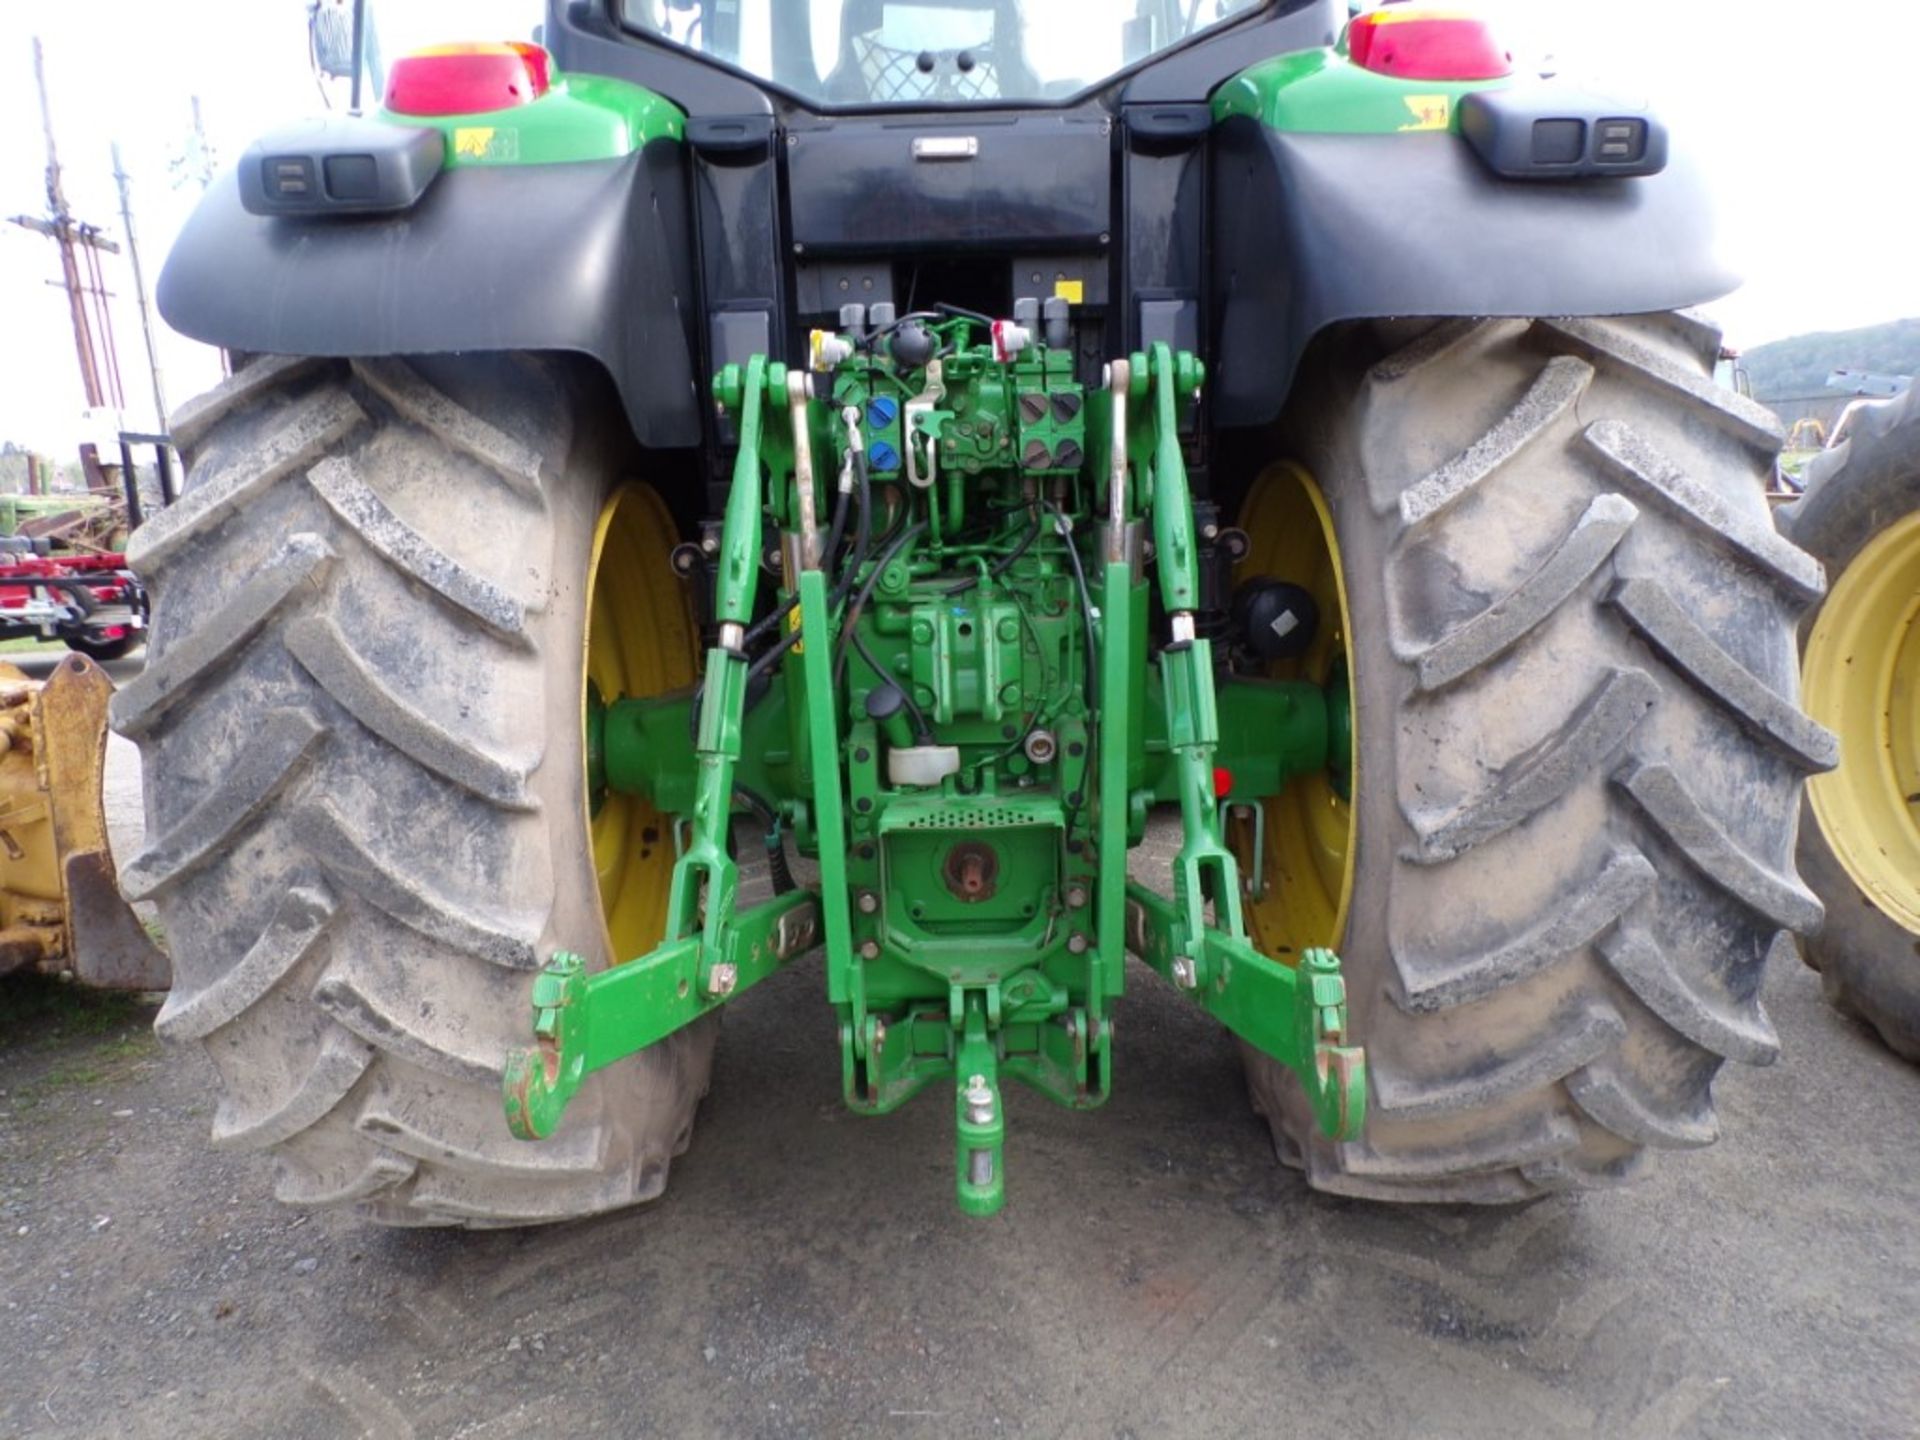 2021 John Deere 6195M, 4 WD Tractor, Power Shift Tans w/Screen, Rear Hyd. Remotes, Air Brake Hookup, - Image 6 of 8